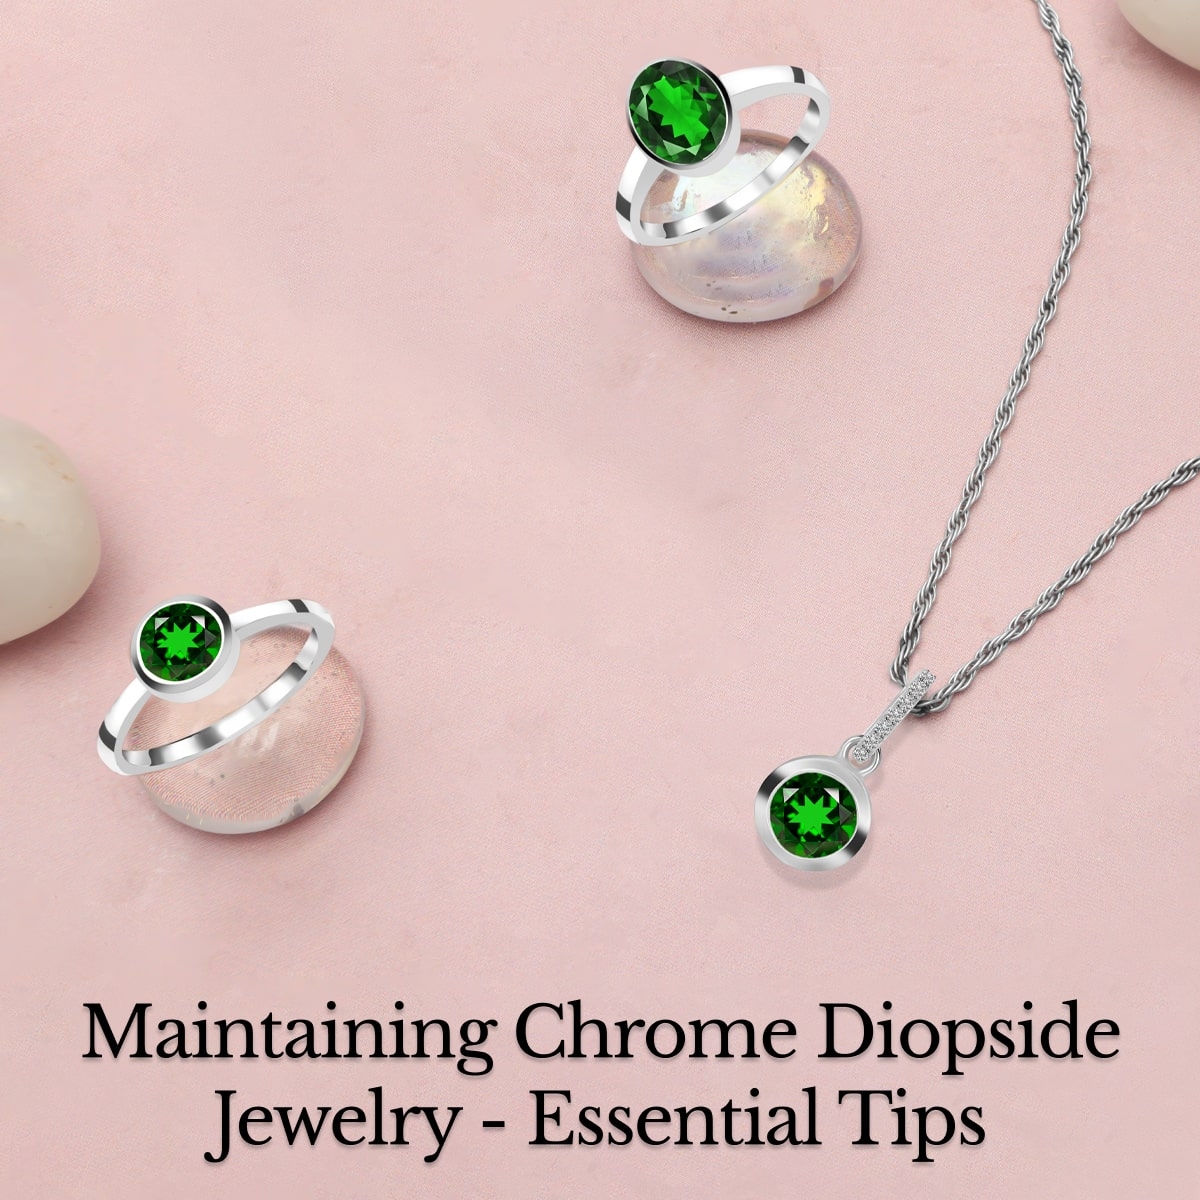 Care & Maintenance of Chrome Diopside Jewelry